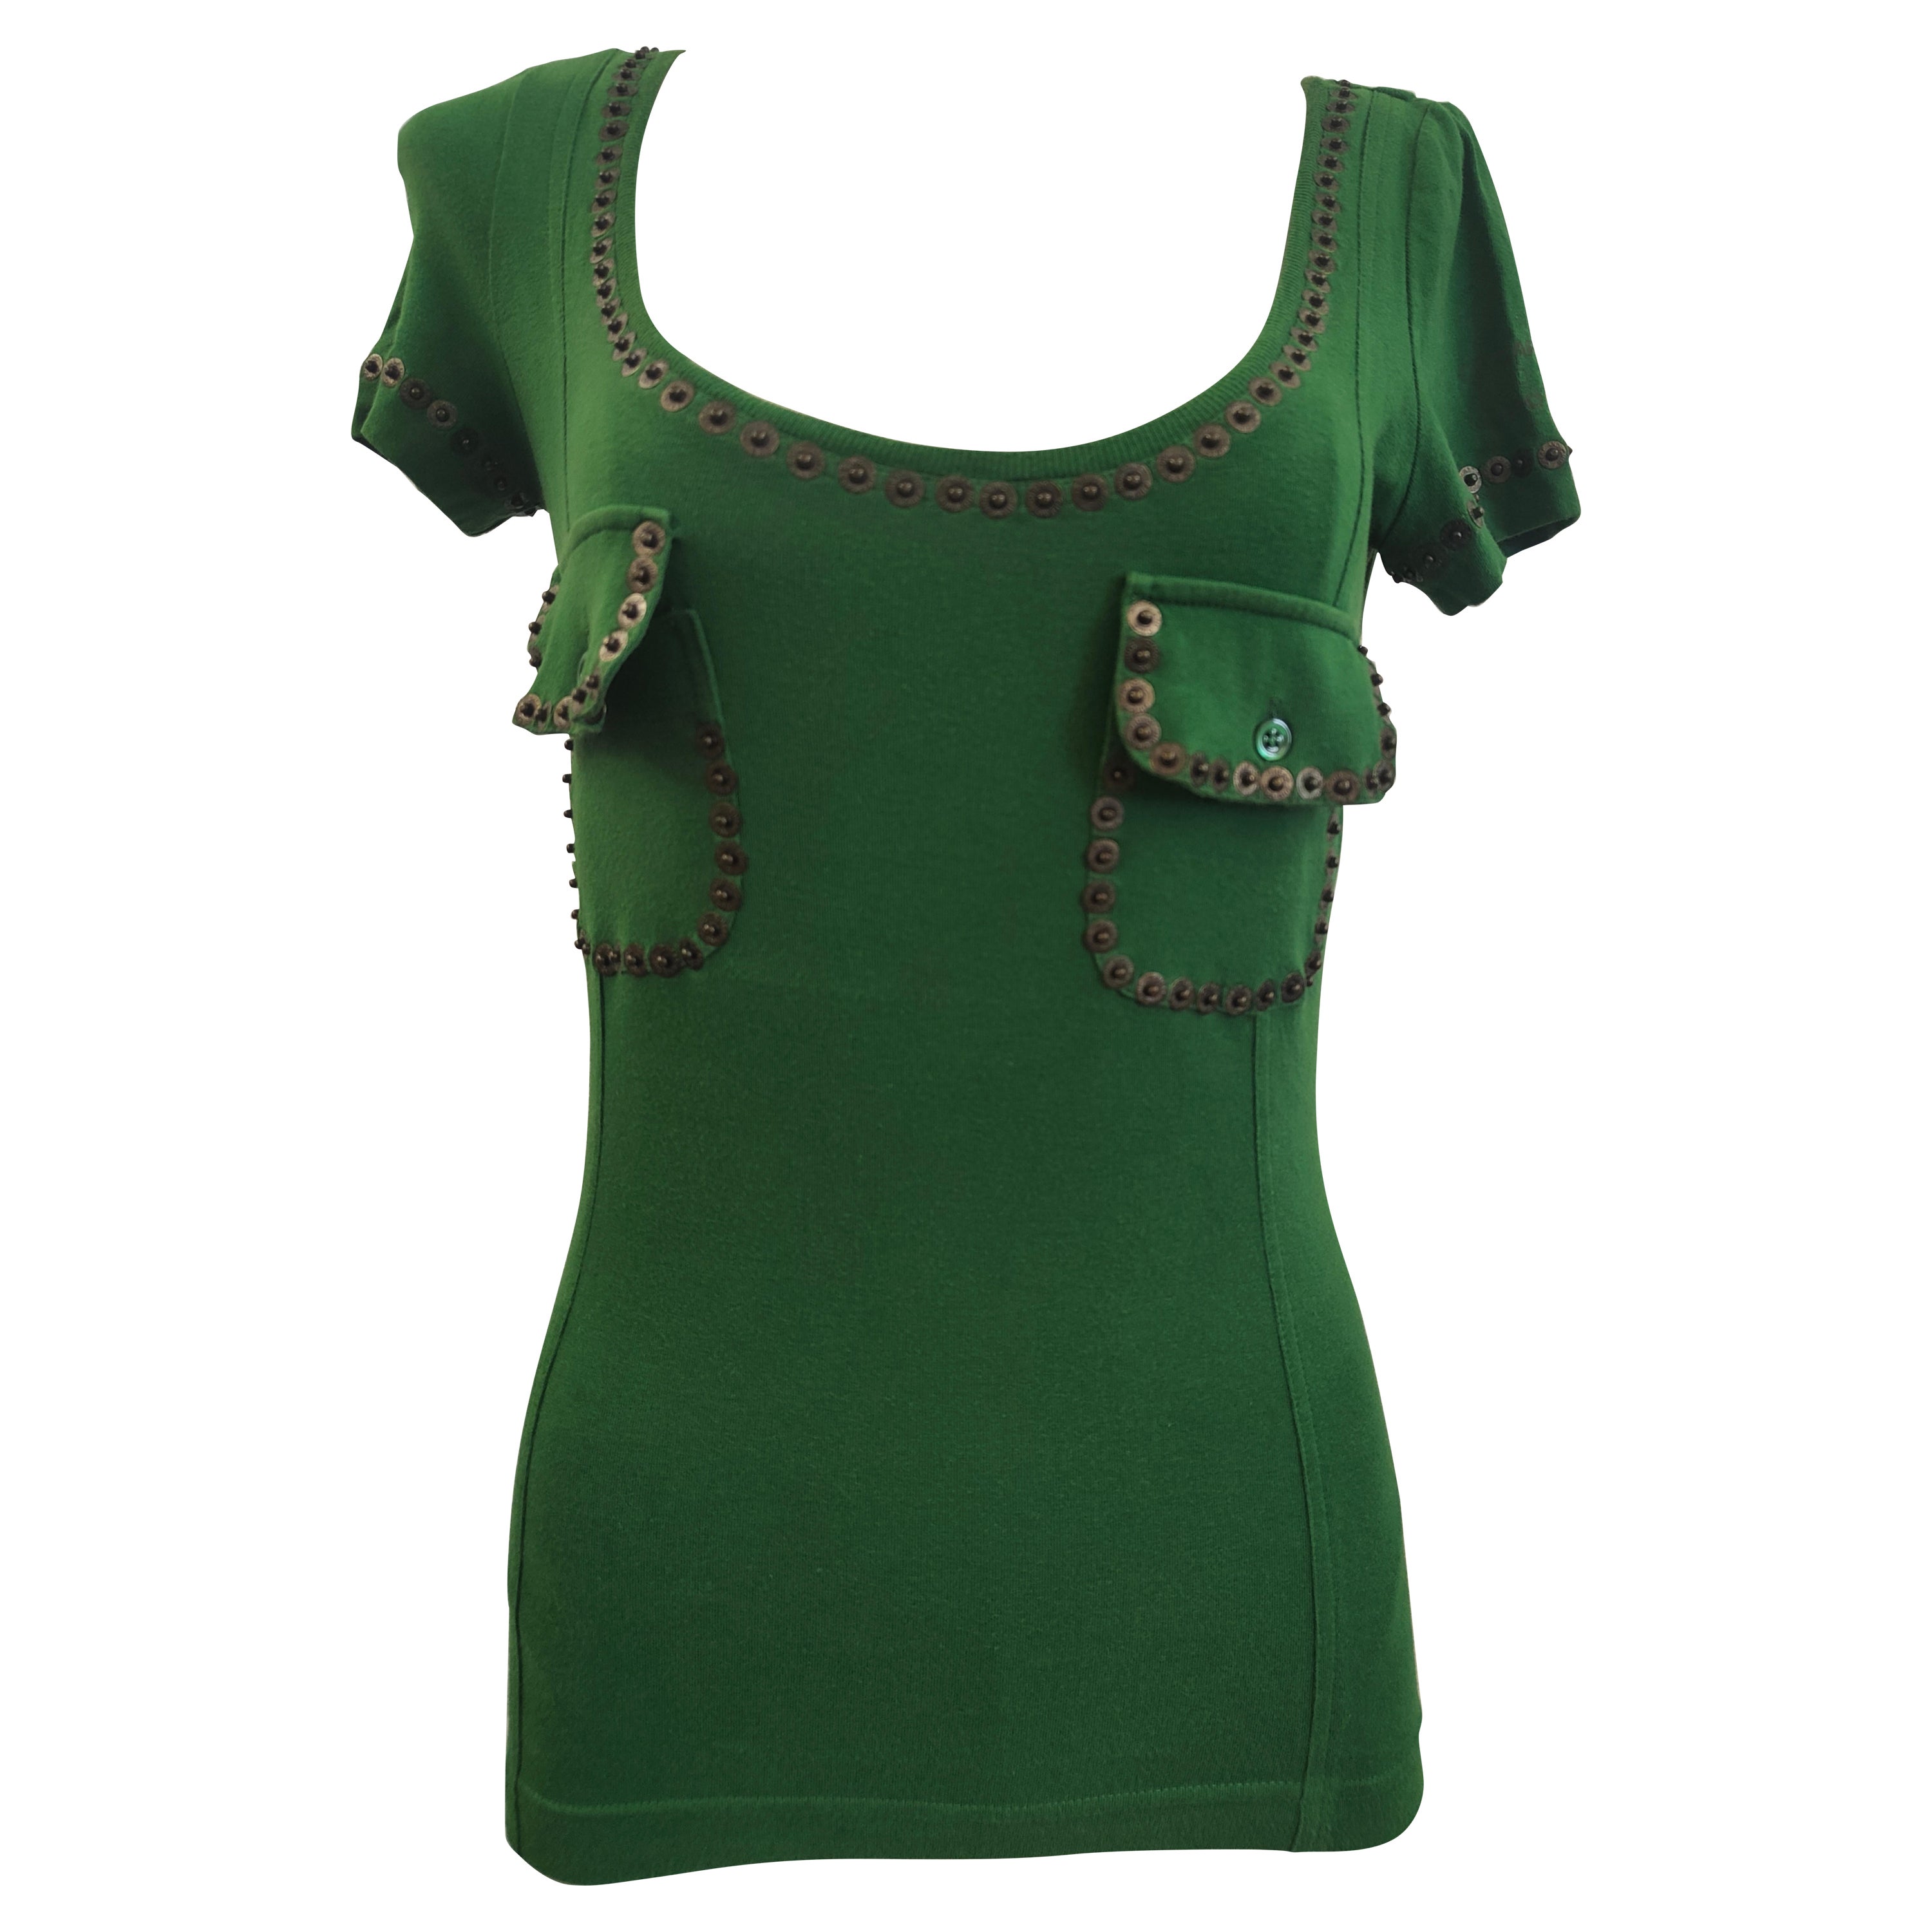 Moschino Cheap & Chic green with beads t-shirt  For Sale